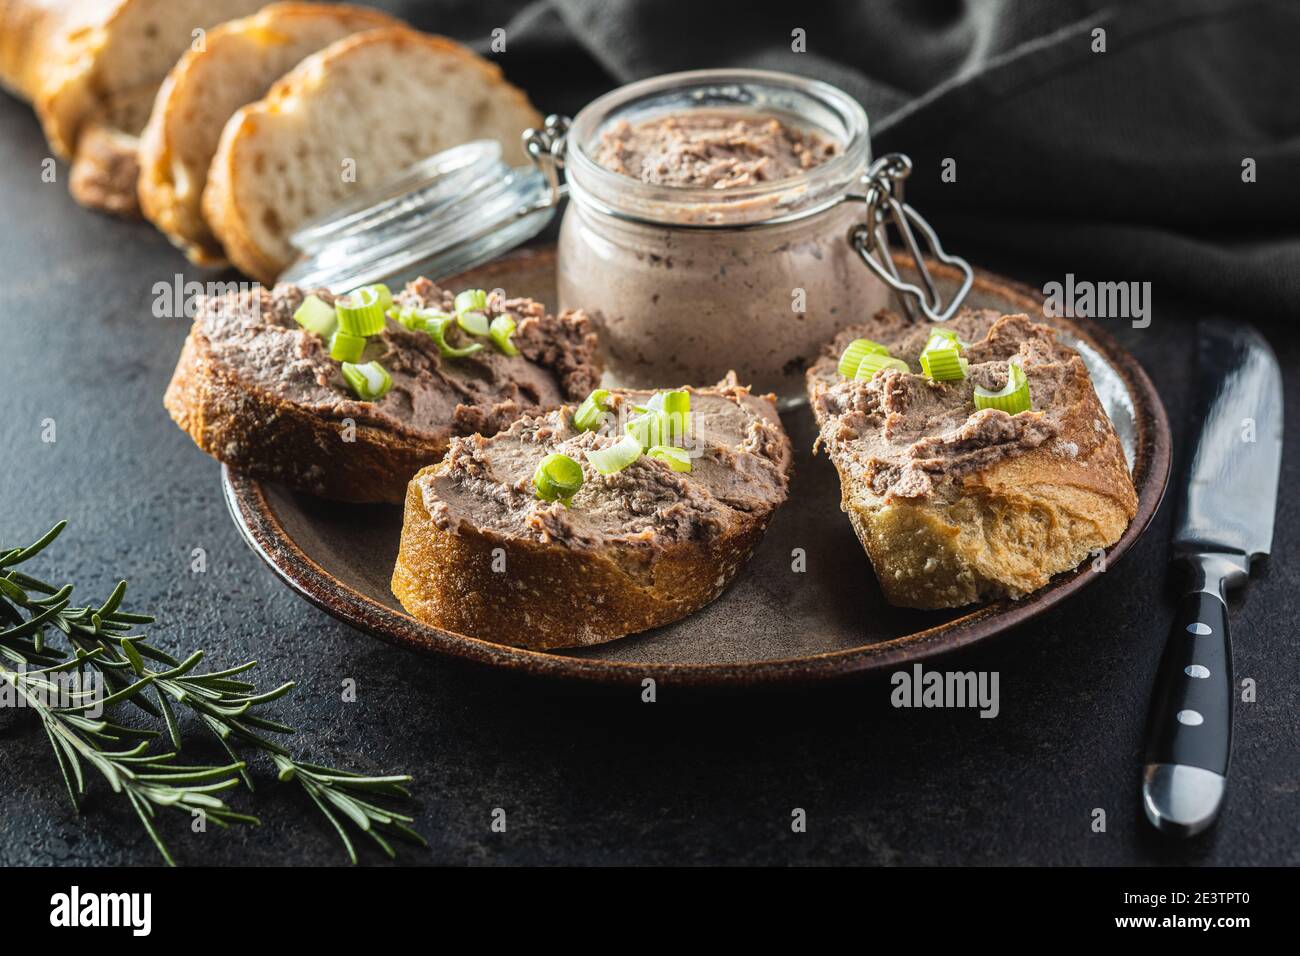 Liver pate on sliced baguette on plate. Stock Photo